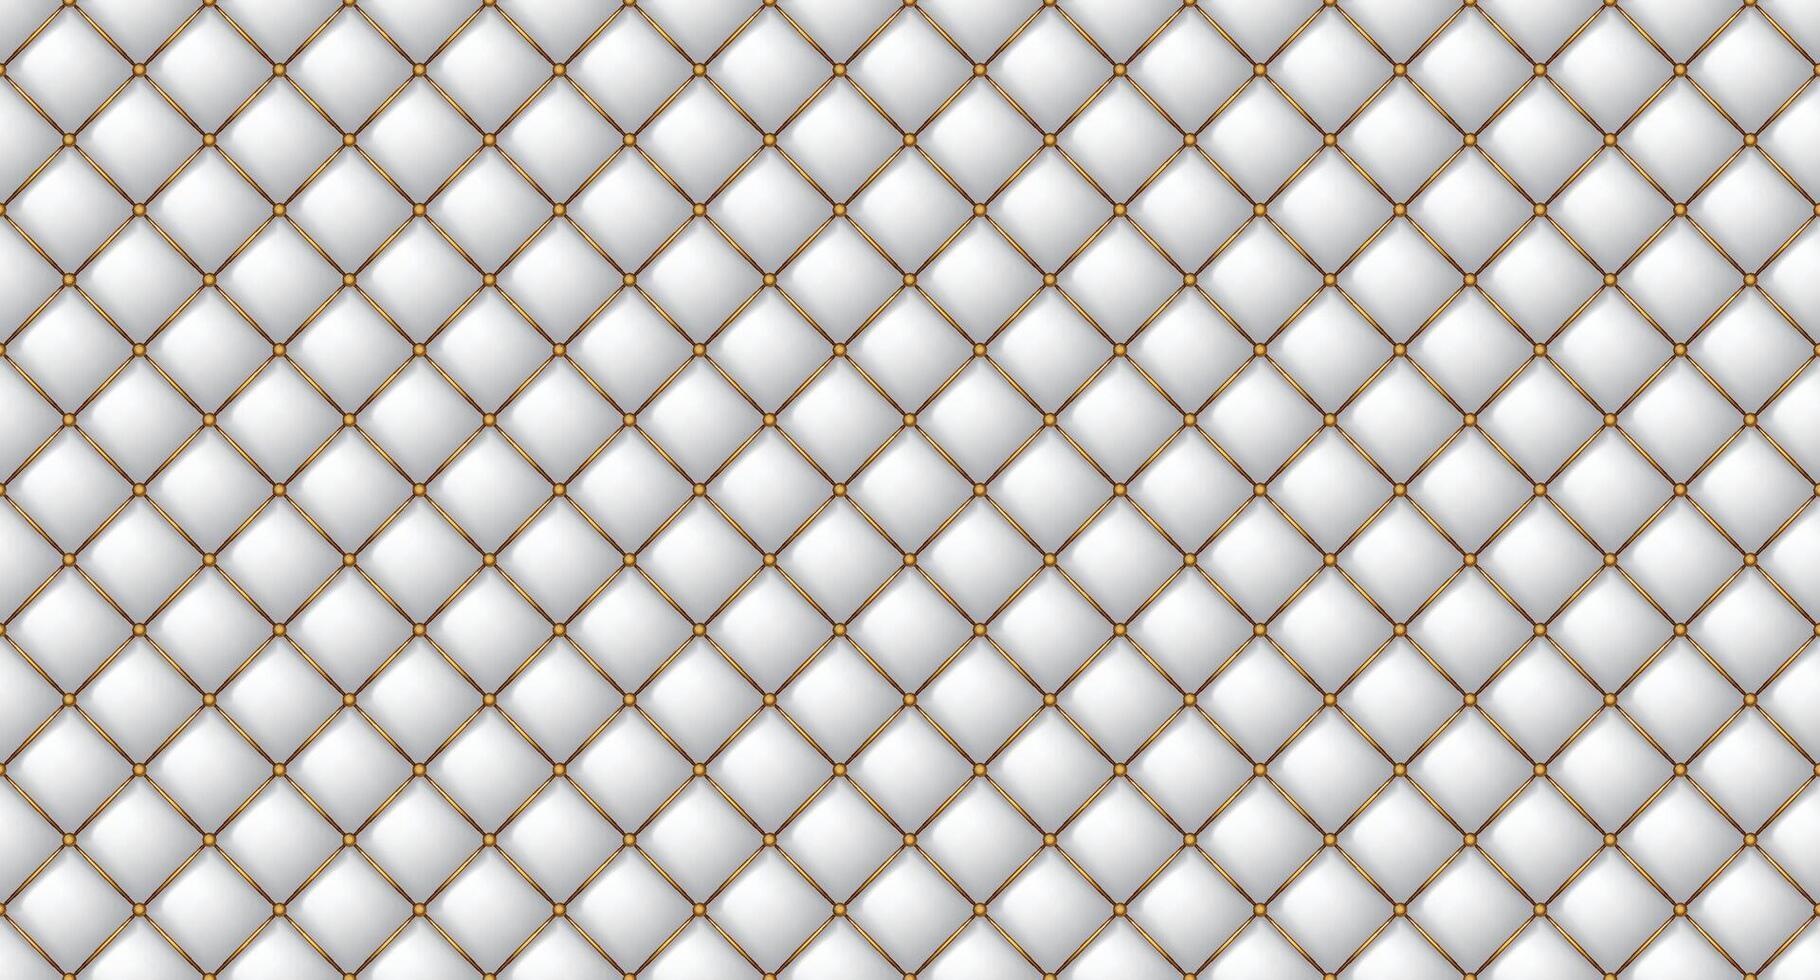 Simple upholstery quilted background. Quilted stitched background pattern. White leather texture sofa backdrop. Seamless texture quilted background vector